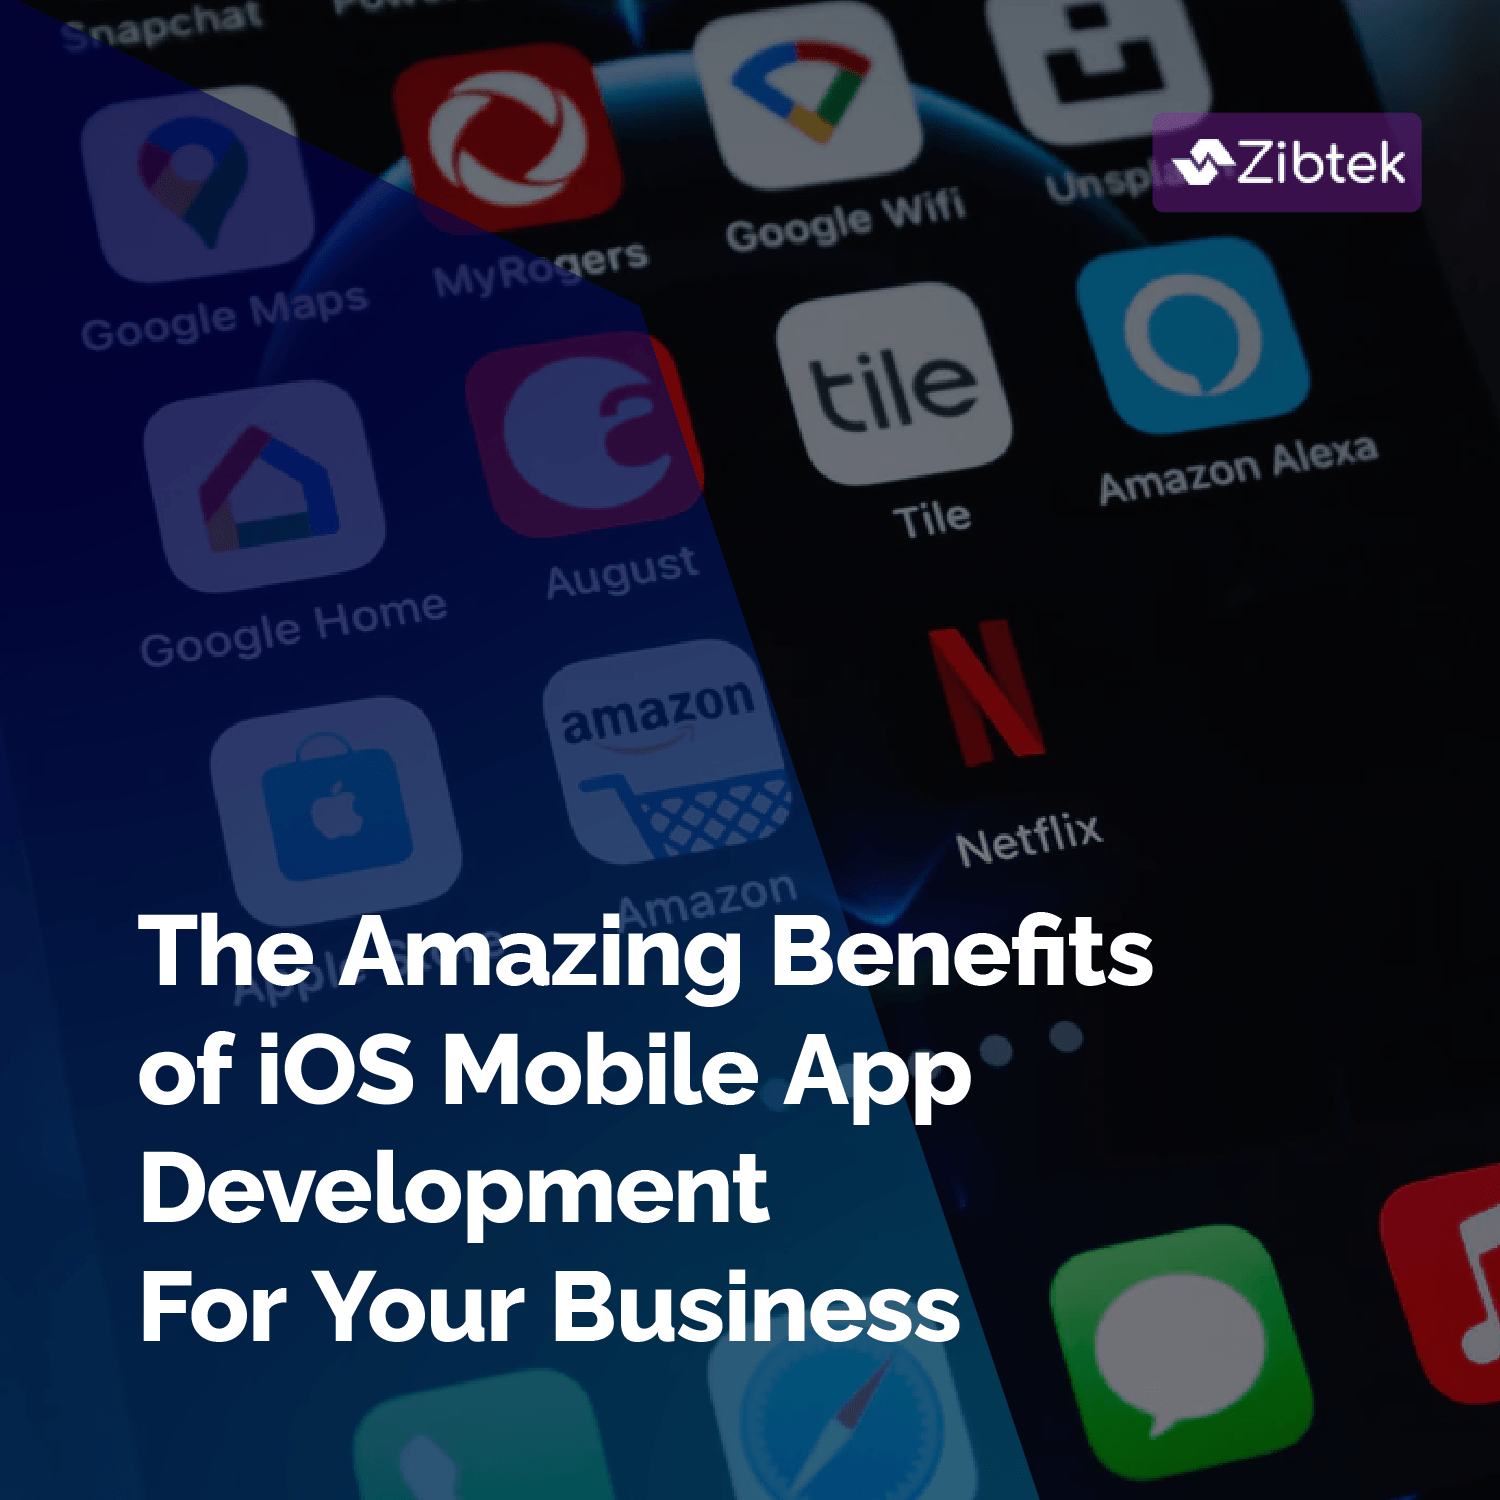 The Amazing Benefits of iOS Mobile App Development For Your Business